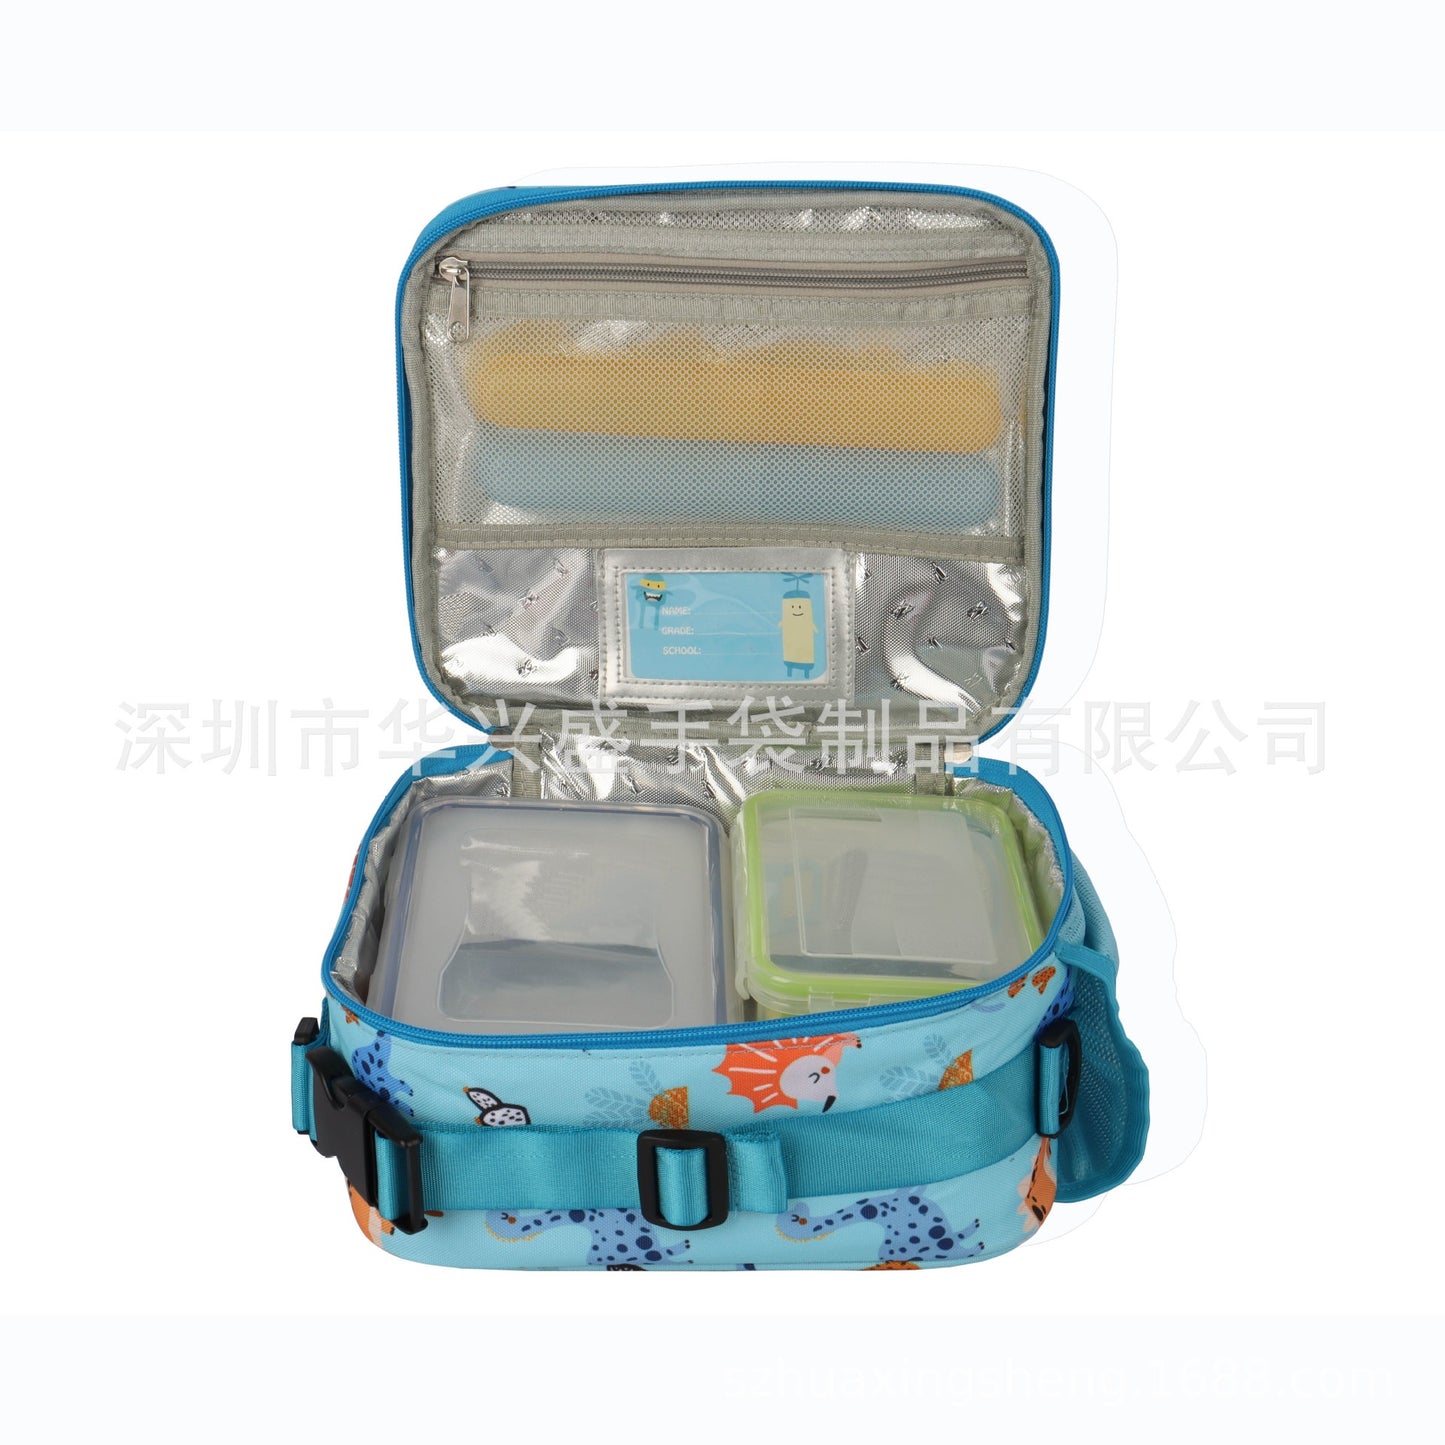 Lunch insulation pack Children's lunch box insulation pack